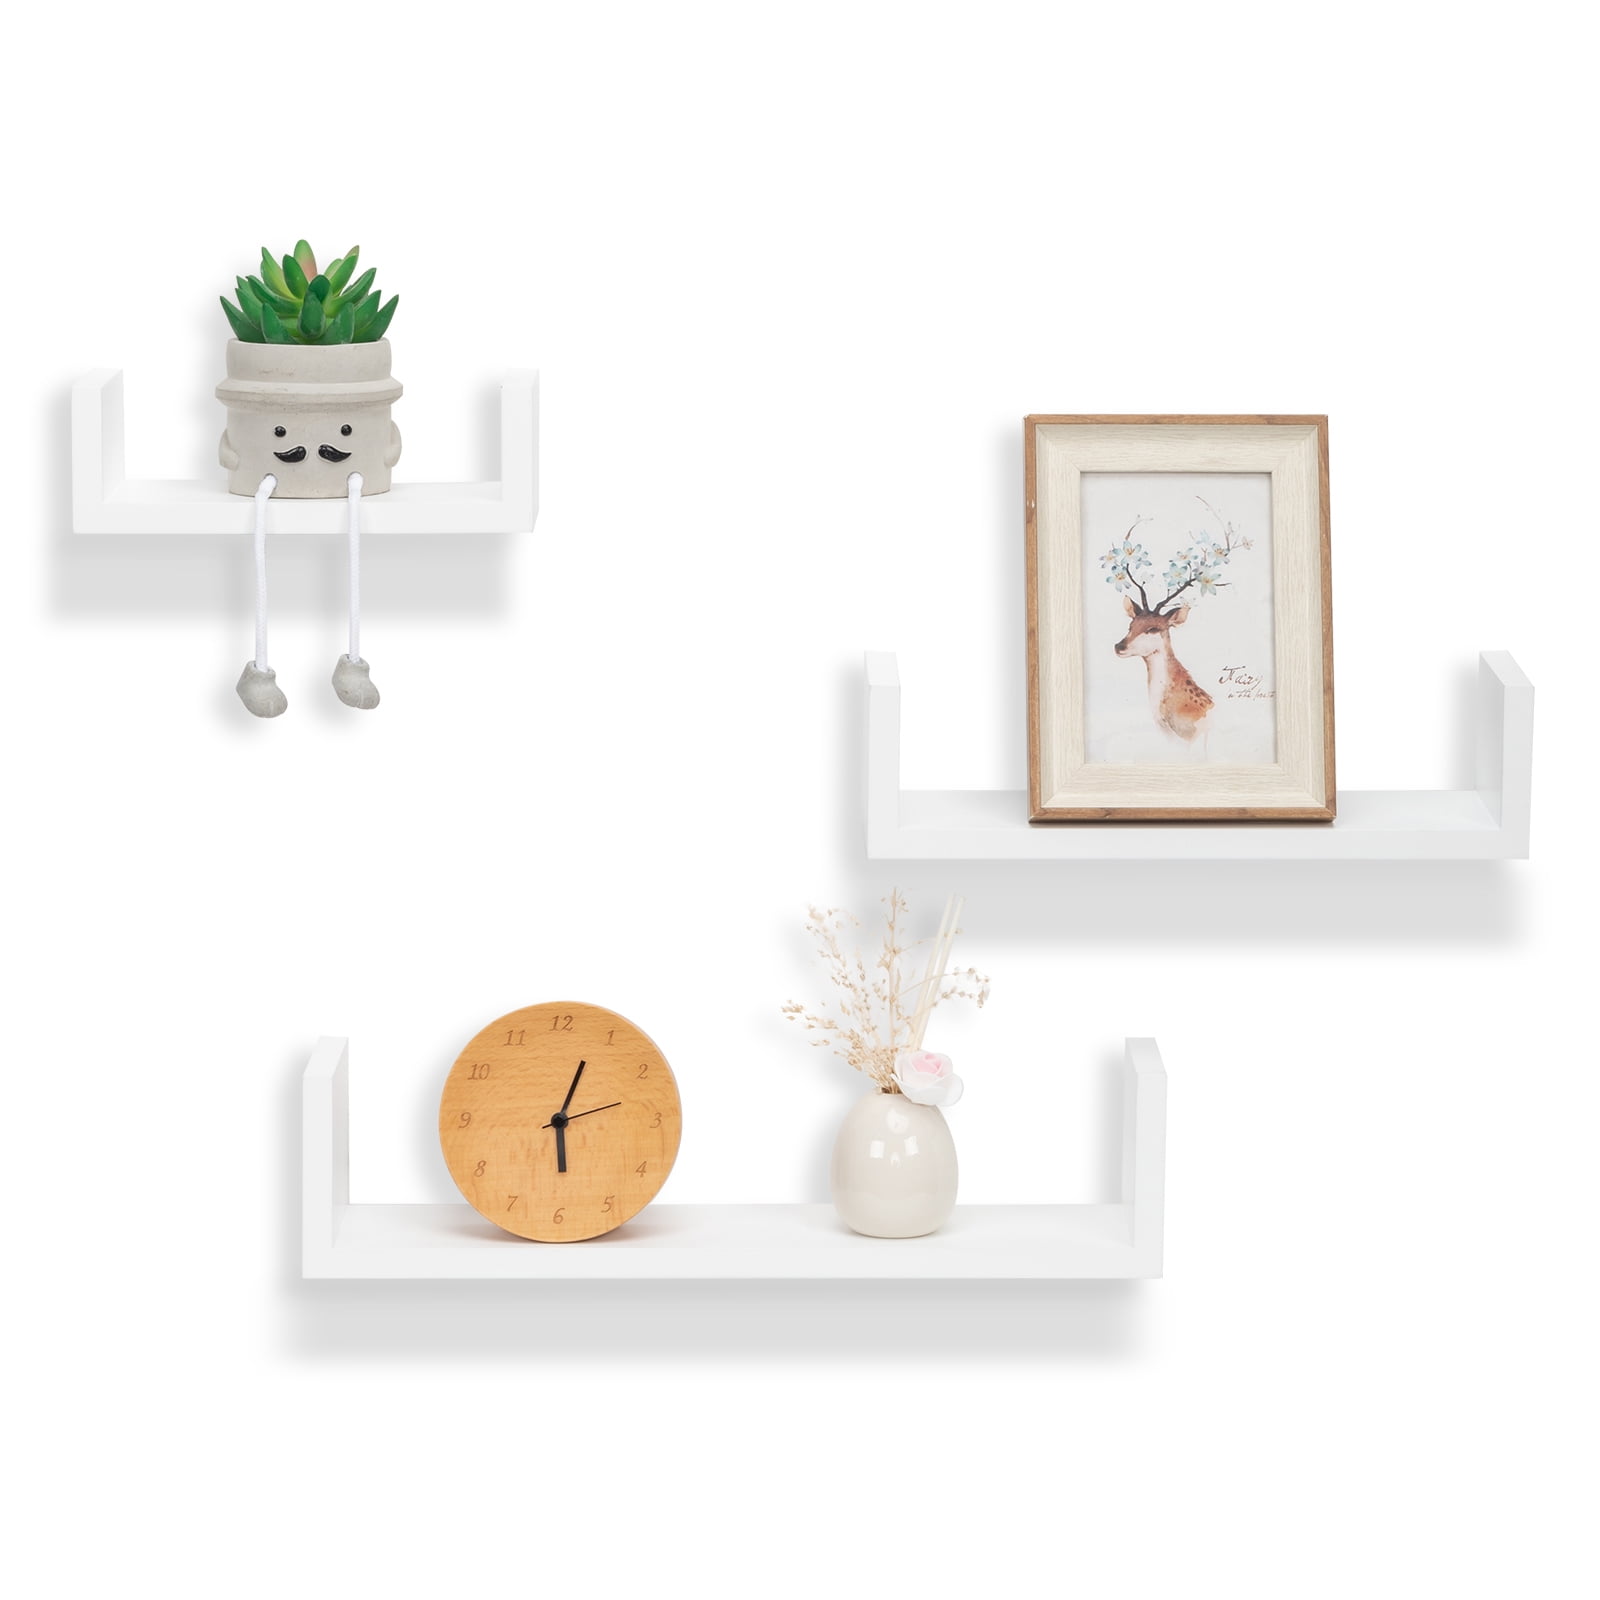 Zimtown Set of 3 Floating Shelves Decorative Wall Mounted Storage Wood  Display Shelves for Living, Dining Room, Office, Bedroom, White